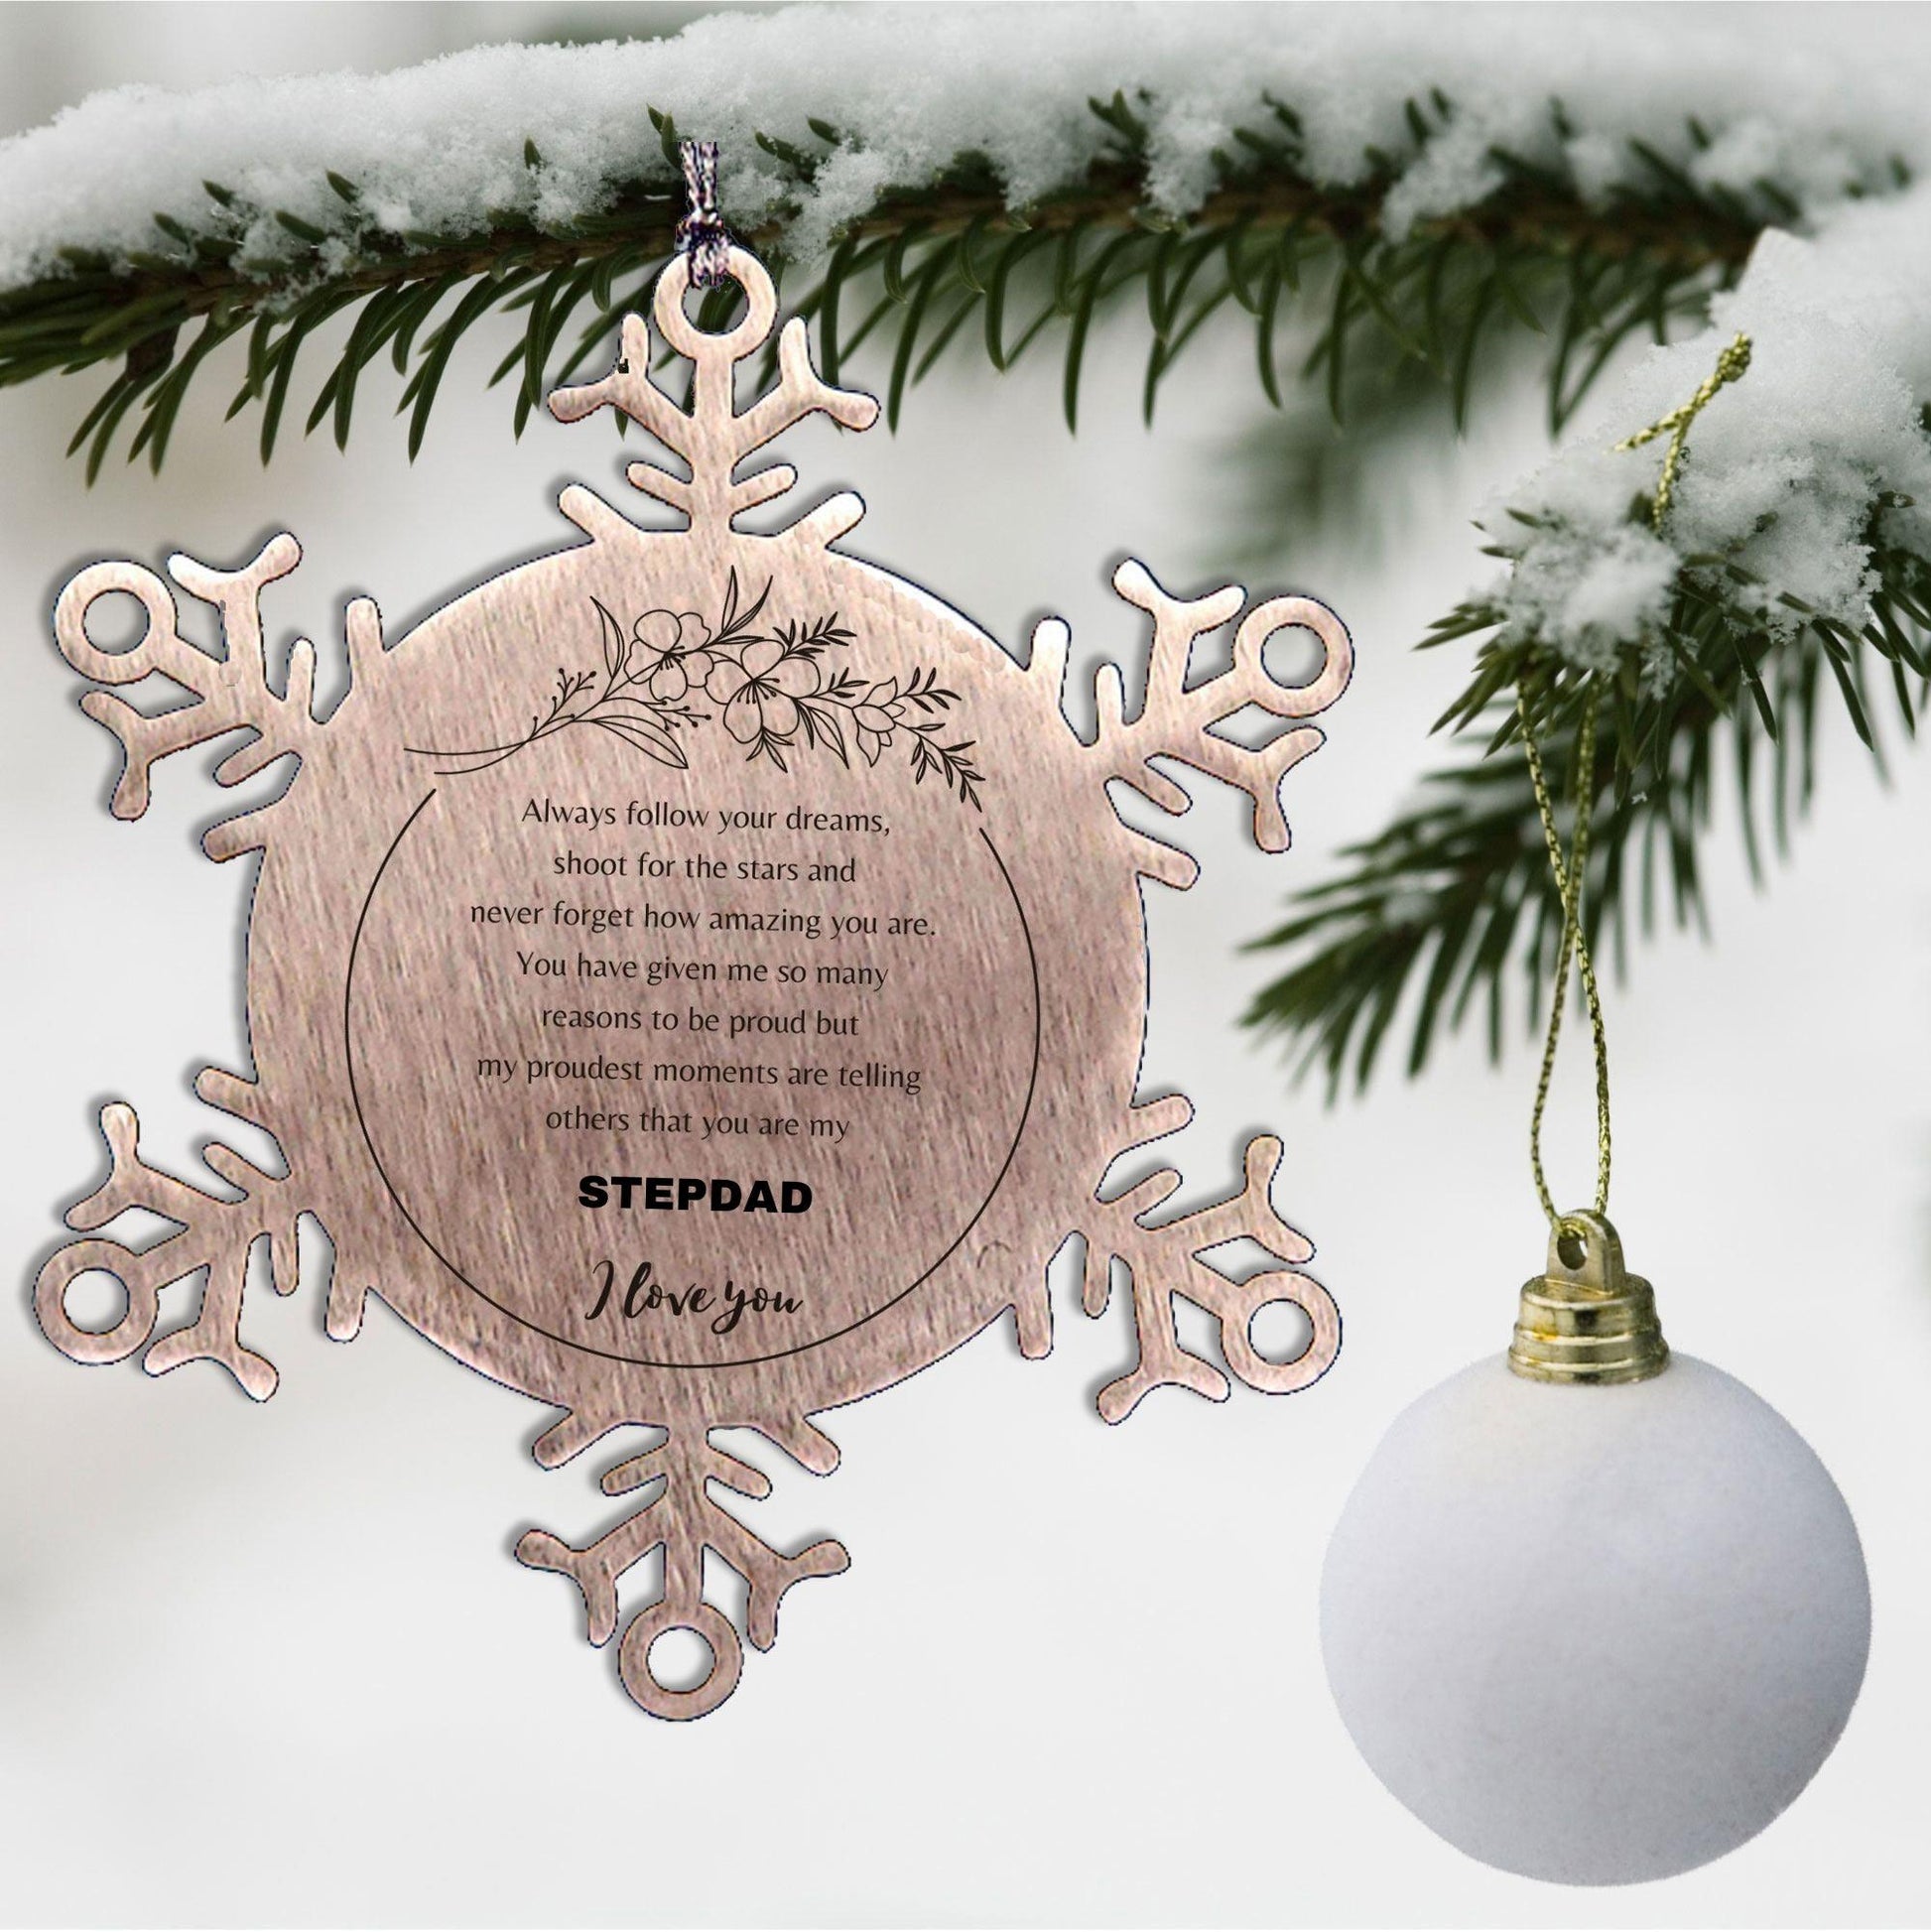 Snowflake Ornament for Stepdad Present, Stepdad Always follow your dreams, never forget how amazing you are, Stepdad Christmas Gifts Decorations for Girls Boys Teen Men Women - Mallard Moon Gift Shop